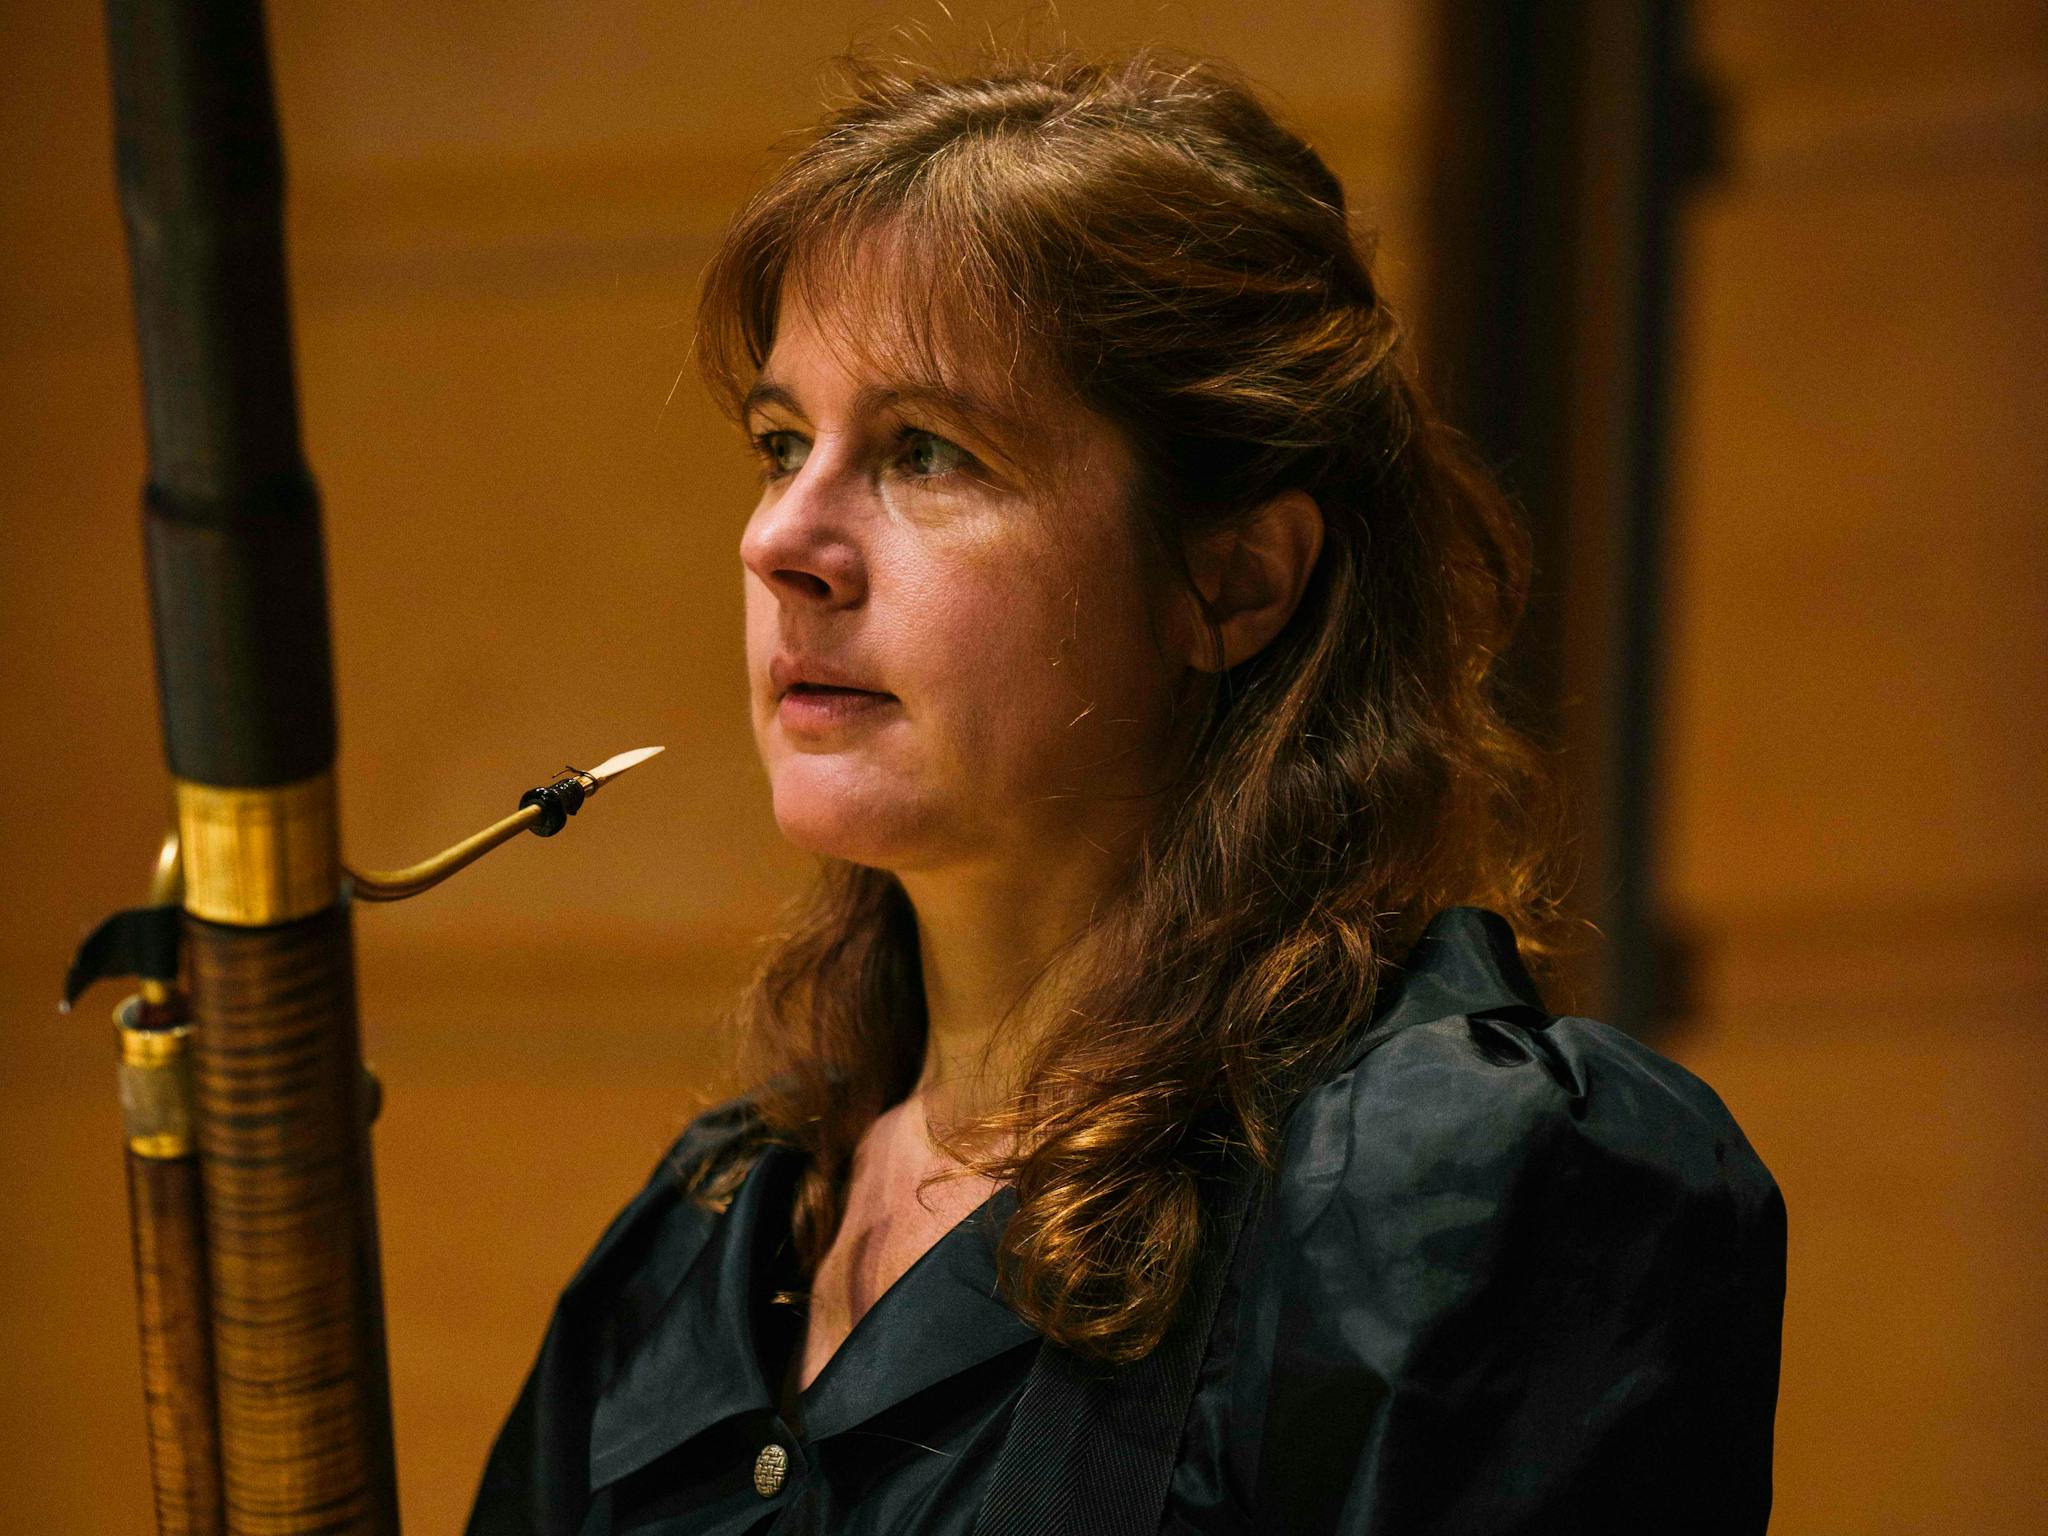 A photo of bassoon player Jane Gower